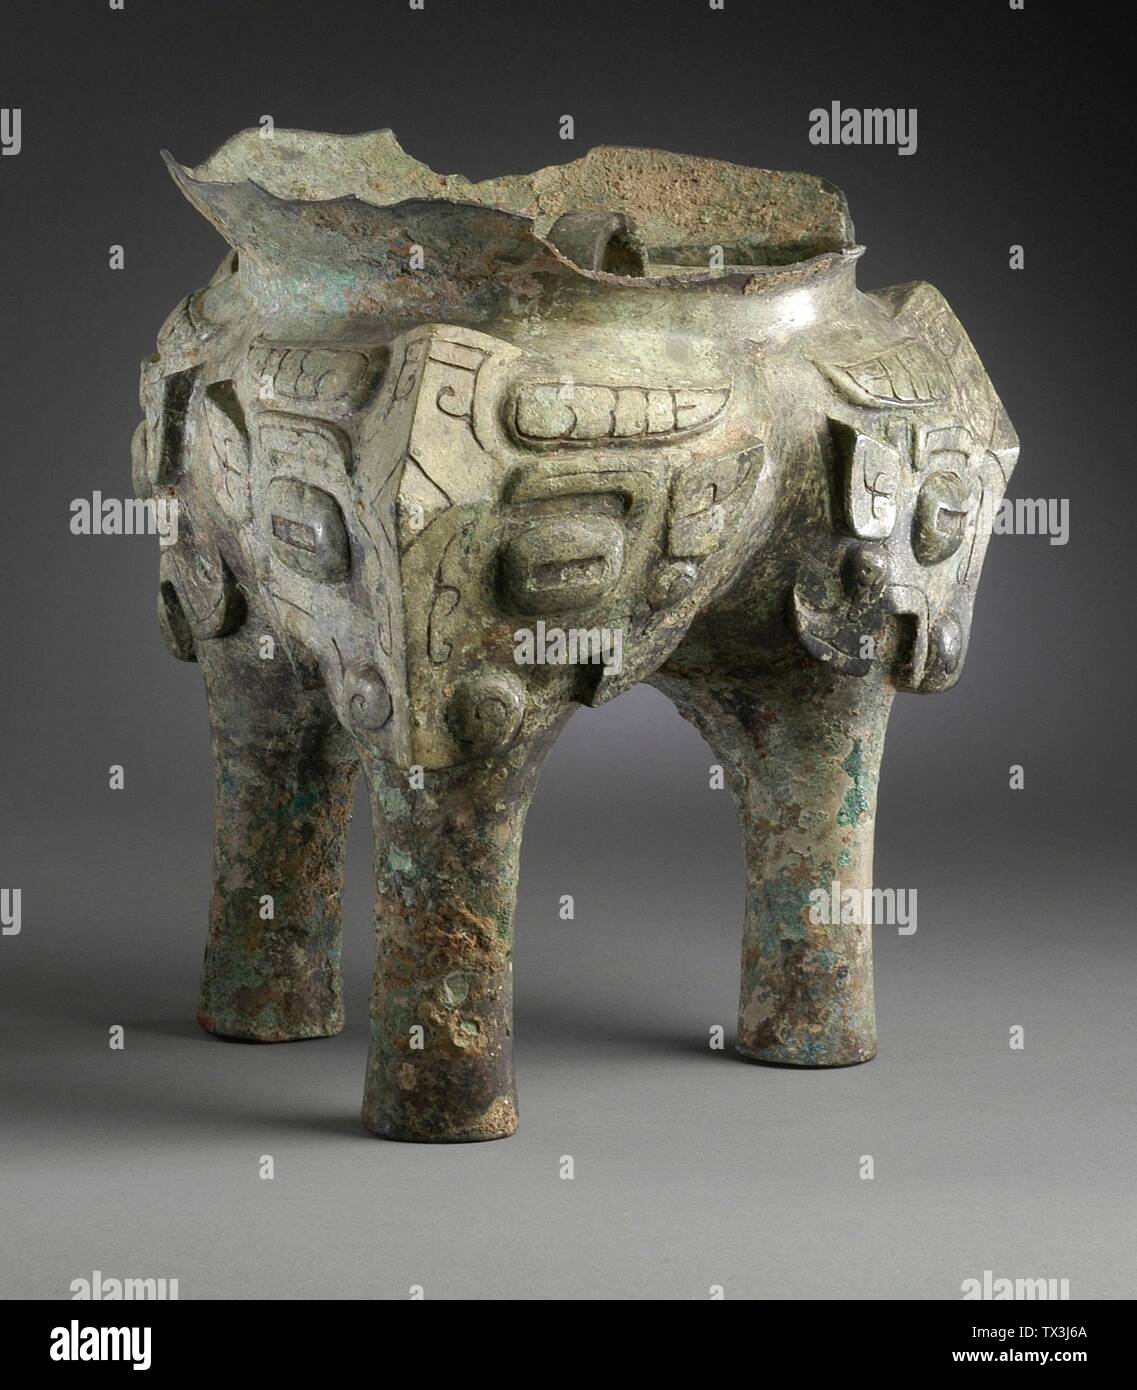 Fragment of a Ritual Grain Steamer (Yan) with Masks; China, Late Shang dynasty, late Anyang phase, or early Western Zhou dynasty, about 1100-950 B.C.  Jewelry and Adornments; masks Cast bronze 8 1/8 x 7 1/4 in. (20.64 x 18.42 cm) Gift of Mr. and Mrs. Eric Lidow (AC1998.251.40) Chinese Art; between circa 1100 and circa 950 B.C.; Stock Photo